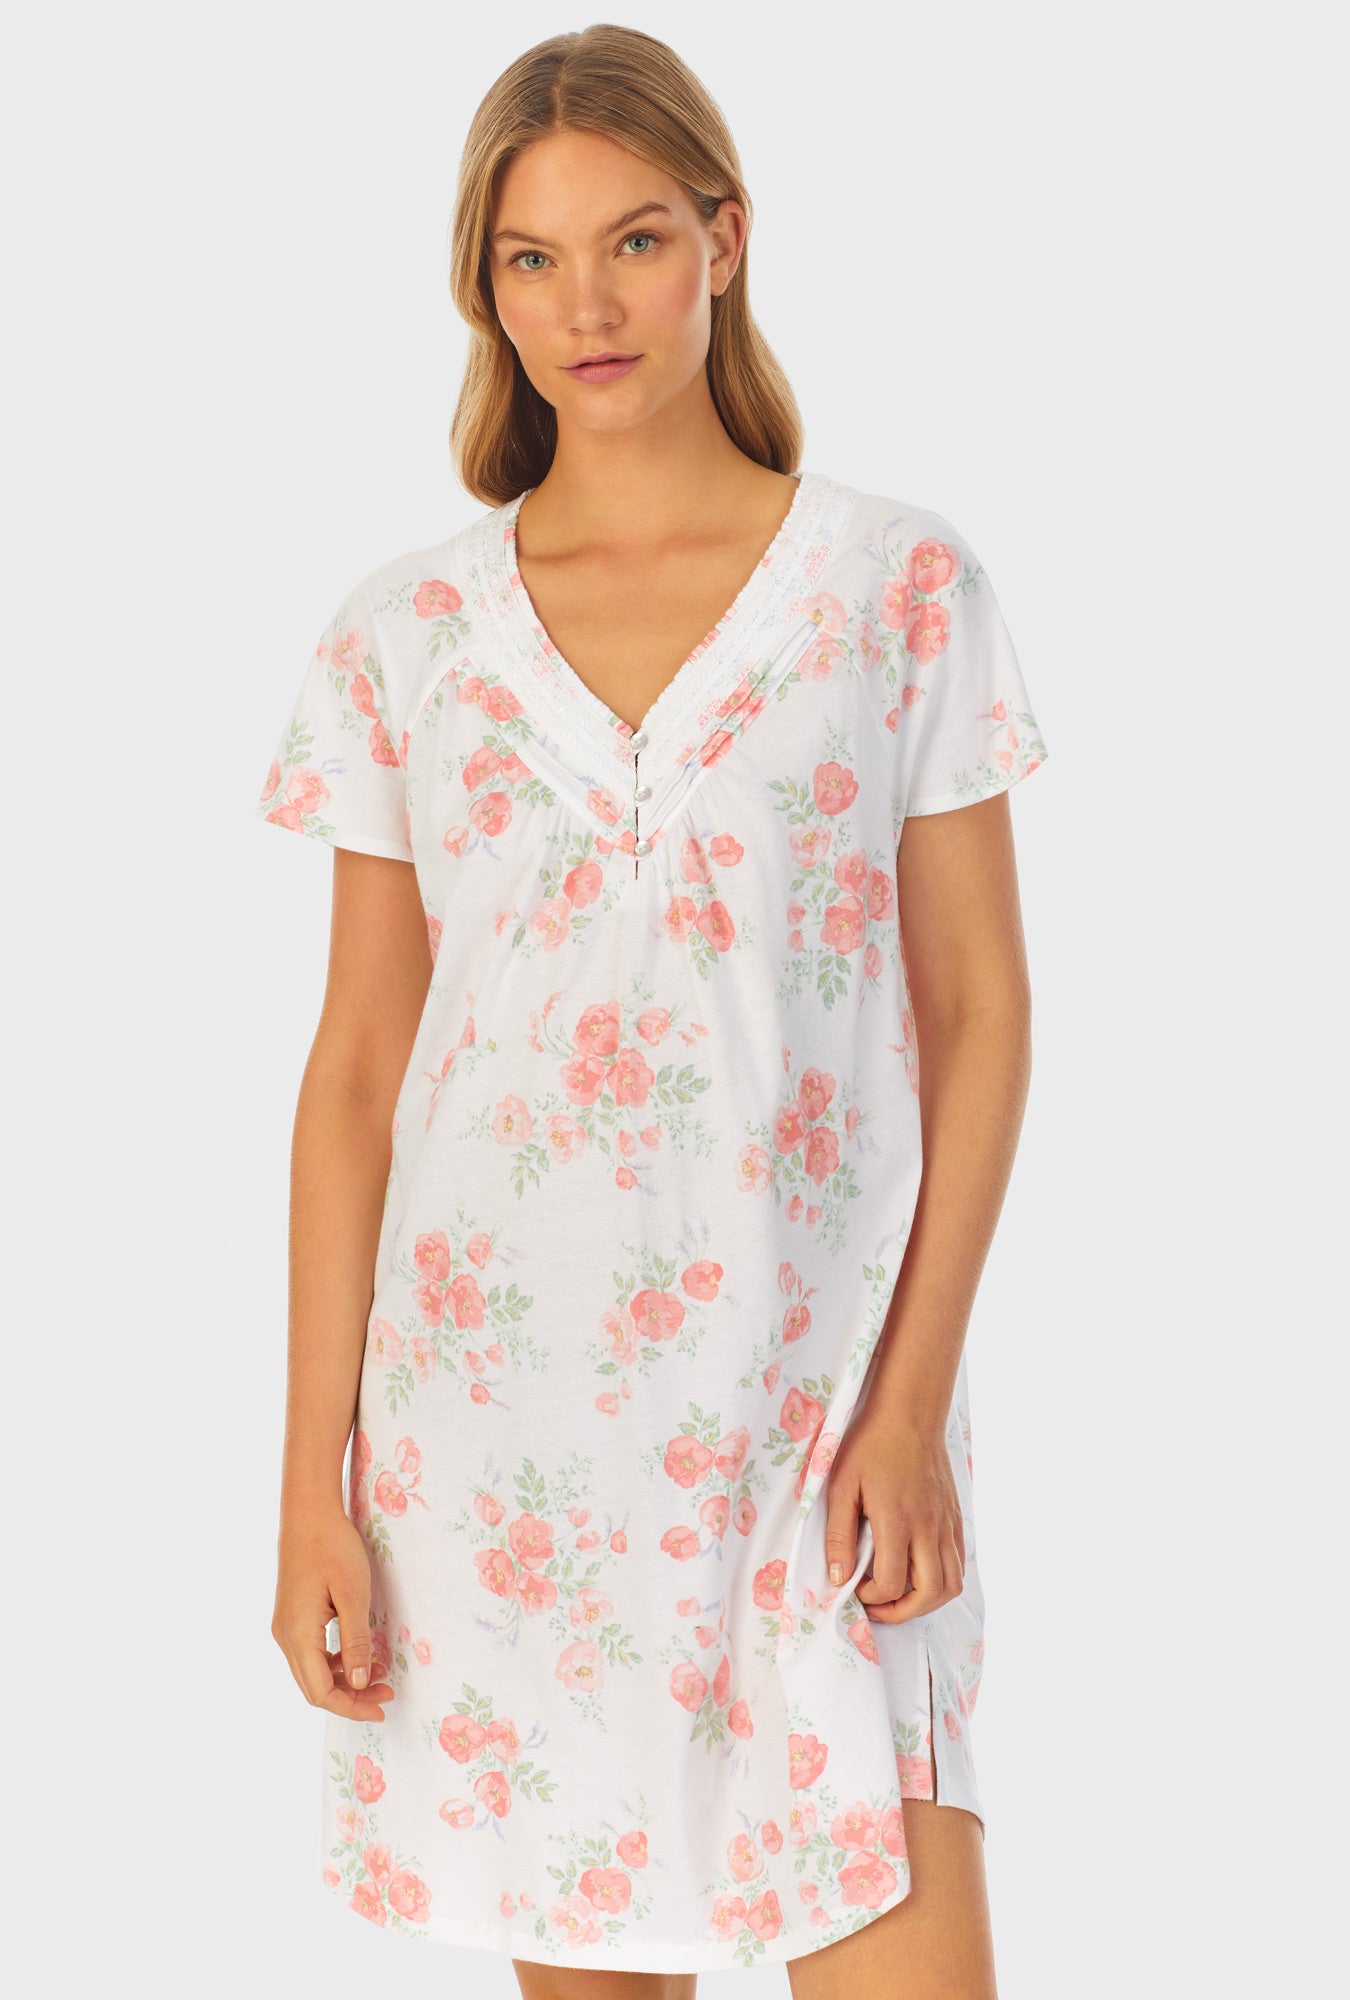 A lady wearing white short sleeve Cotton Short Nightgown with Watercolor Fleur print